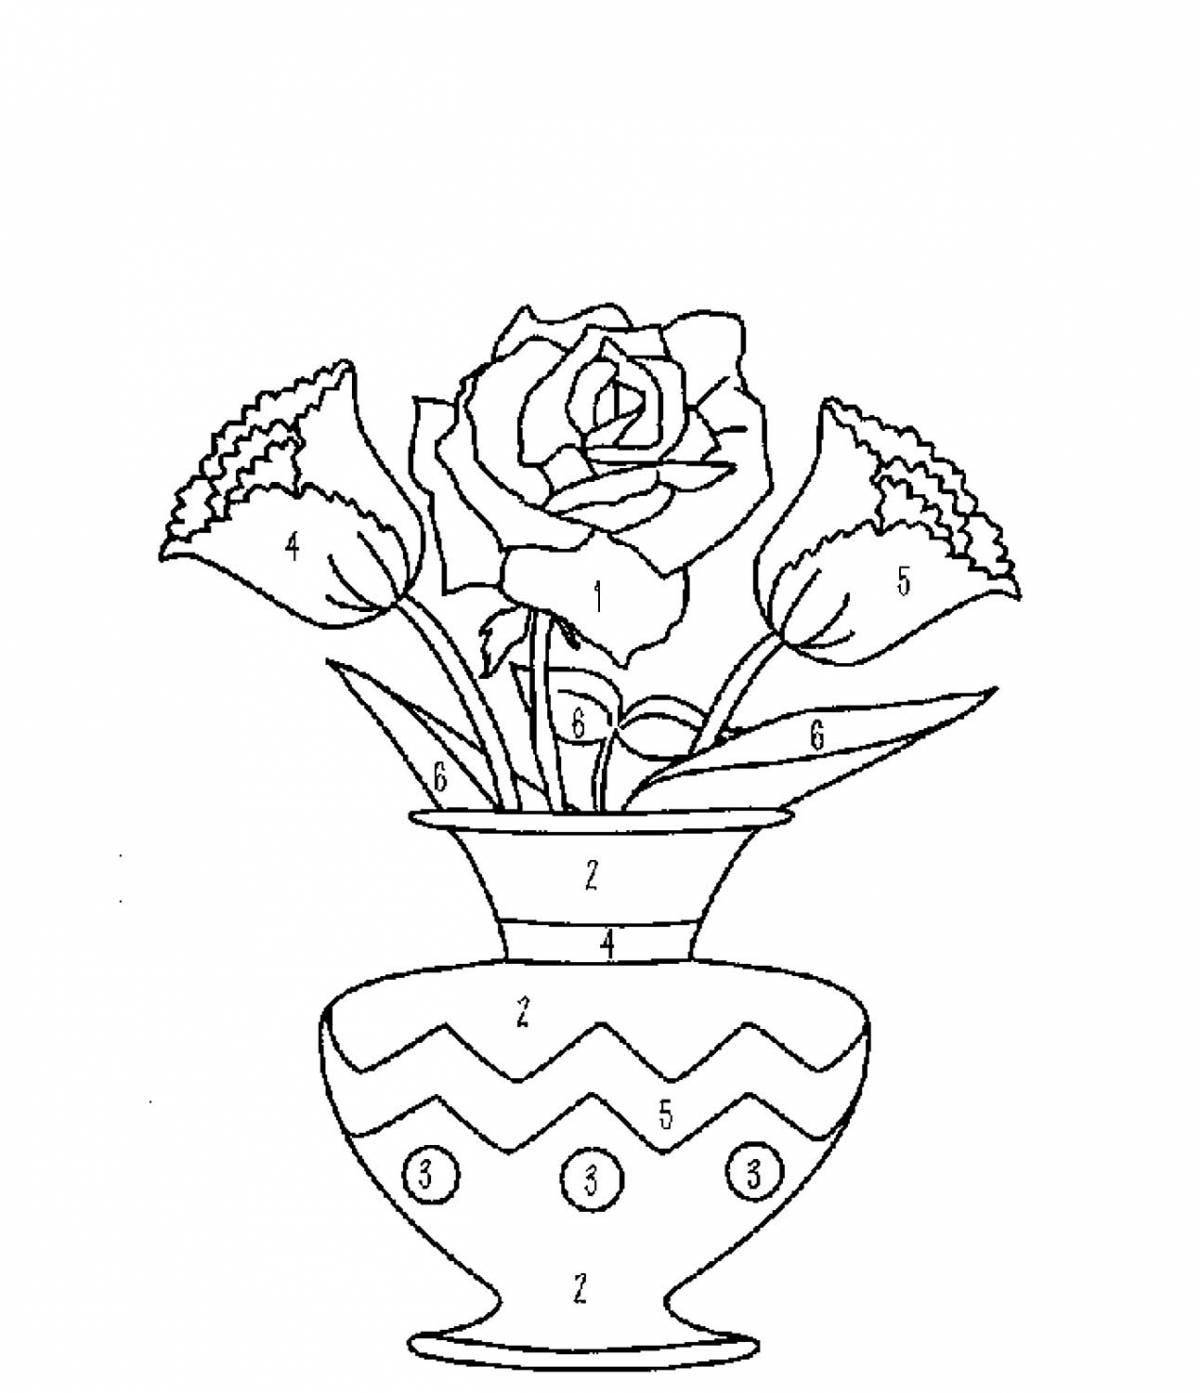 Fun coloring of roses in a vase